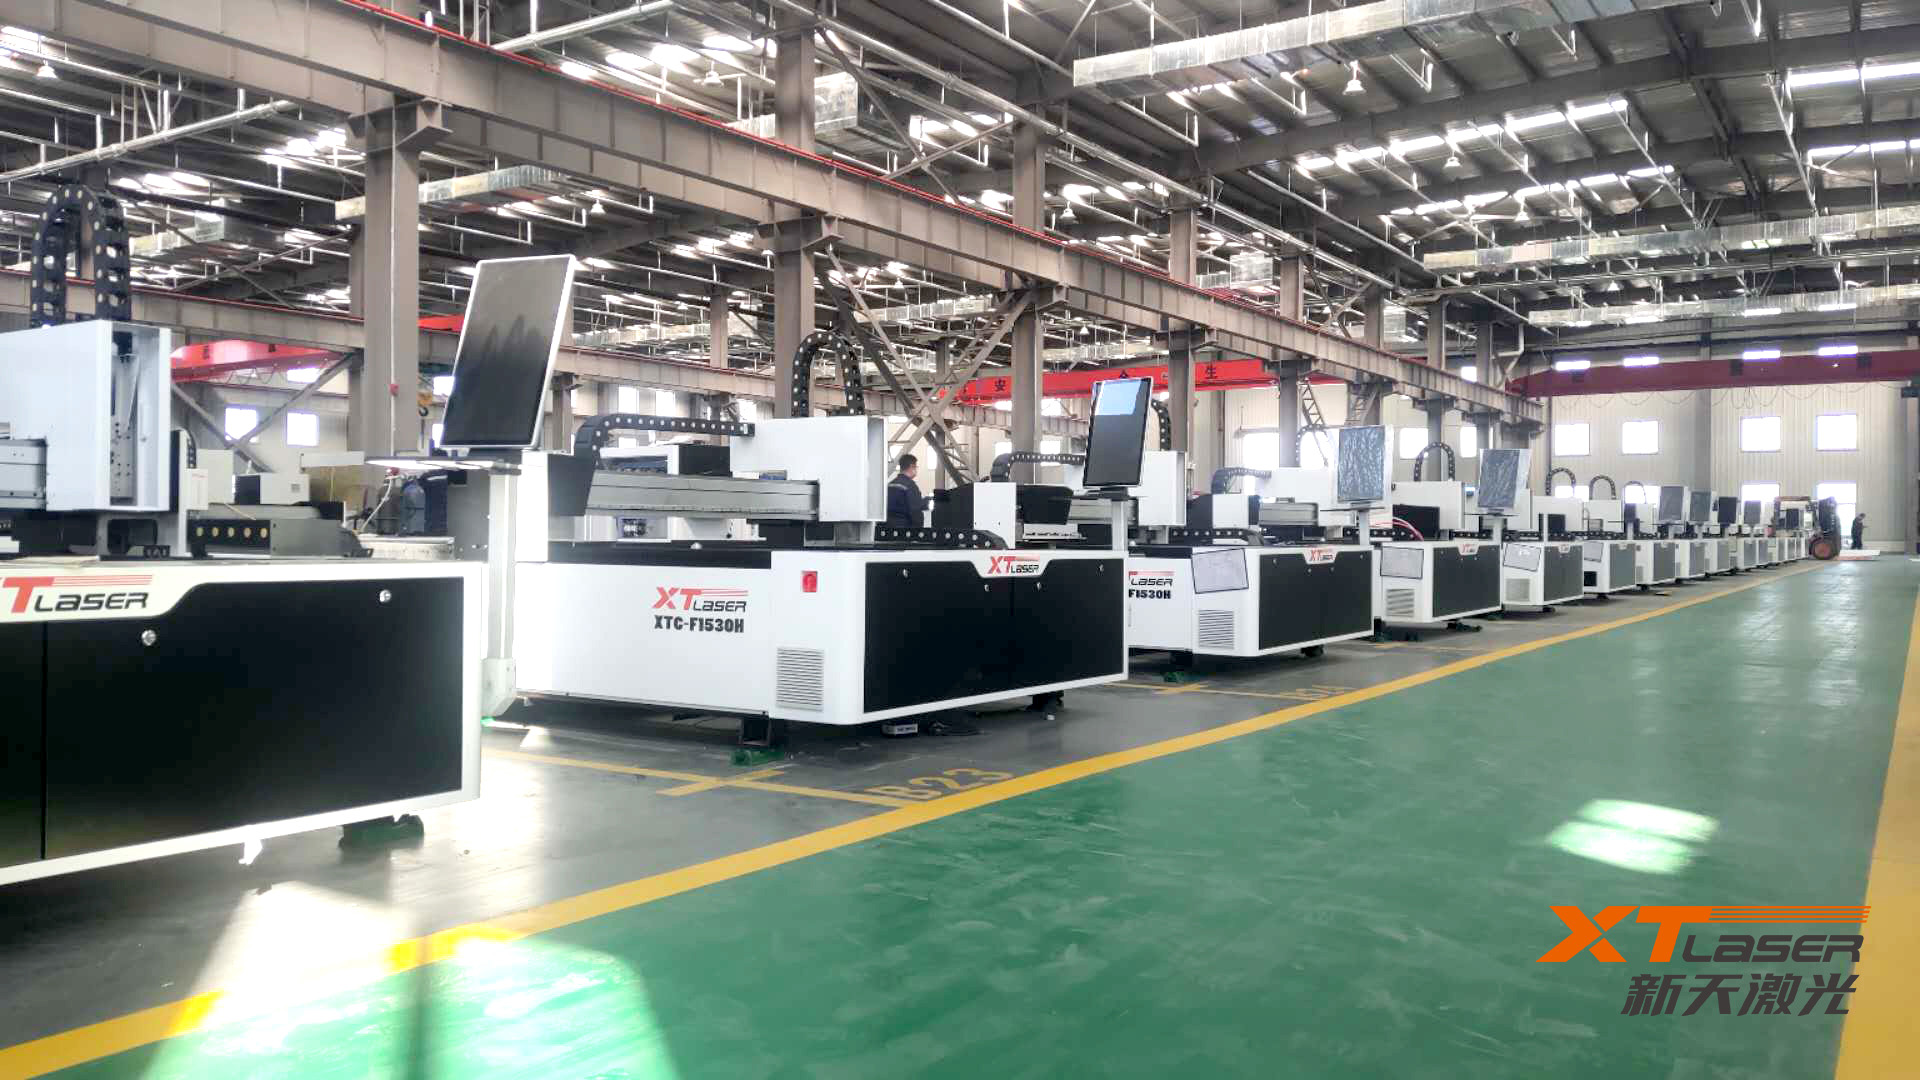 Several characteristics are required for high-quality fiber laser cutting machines